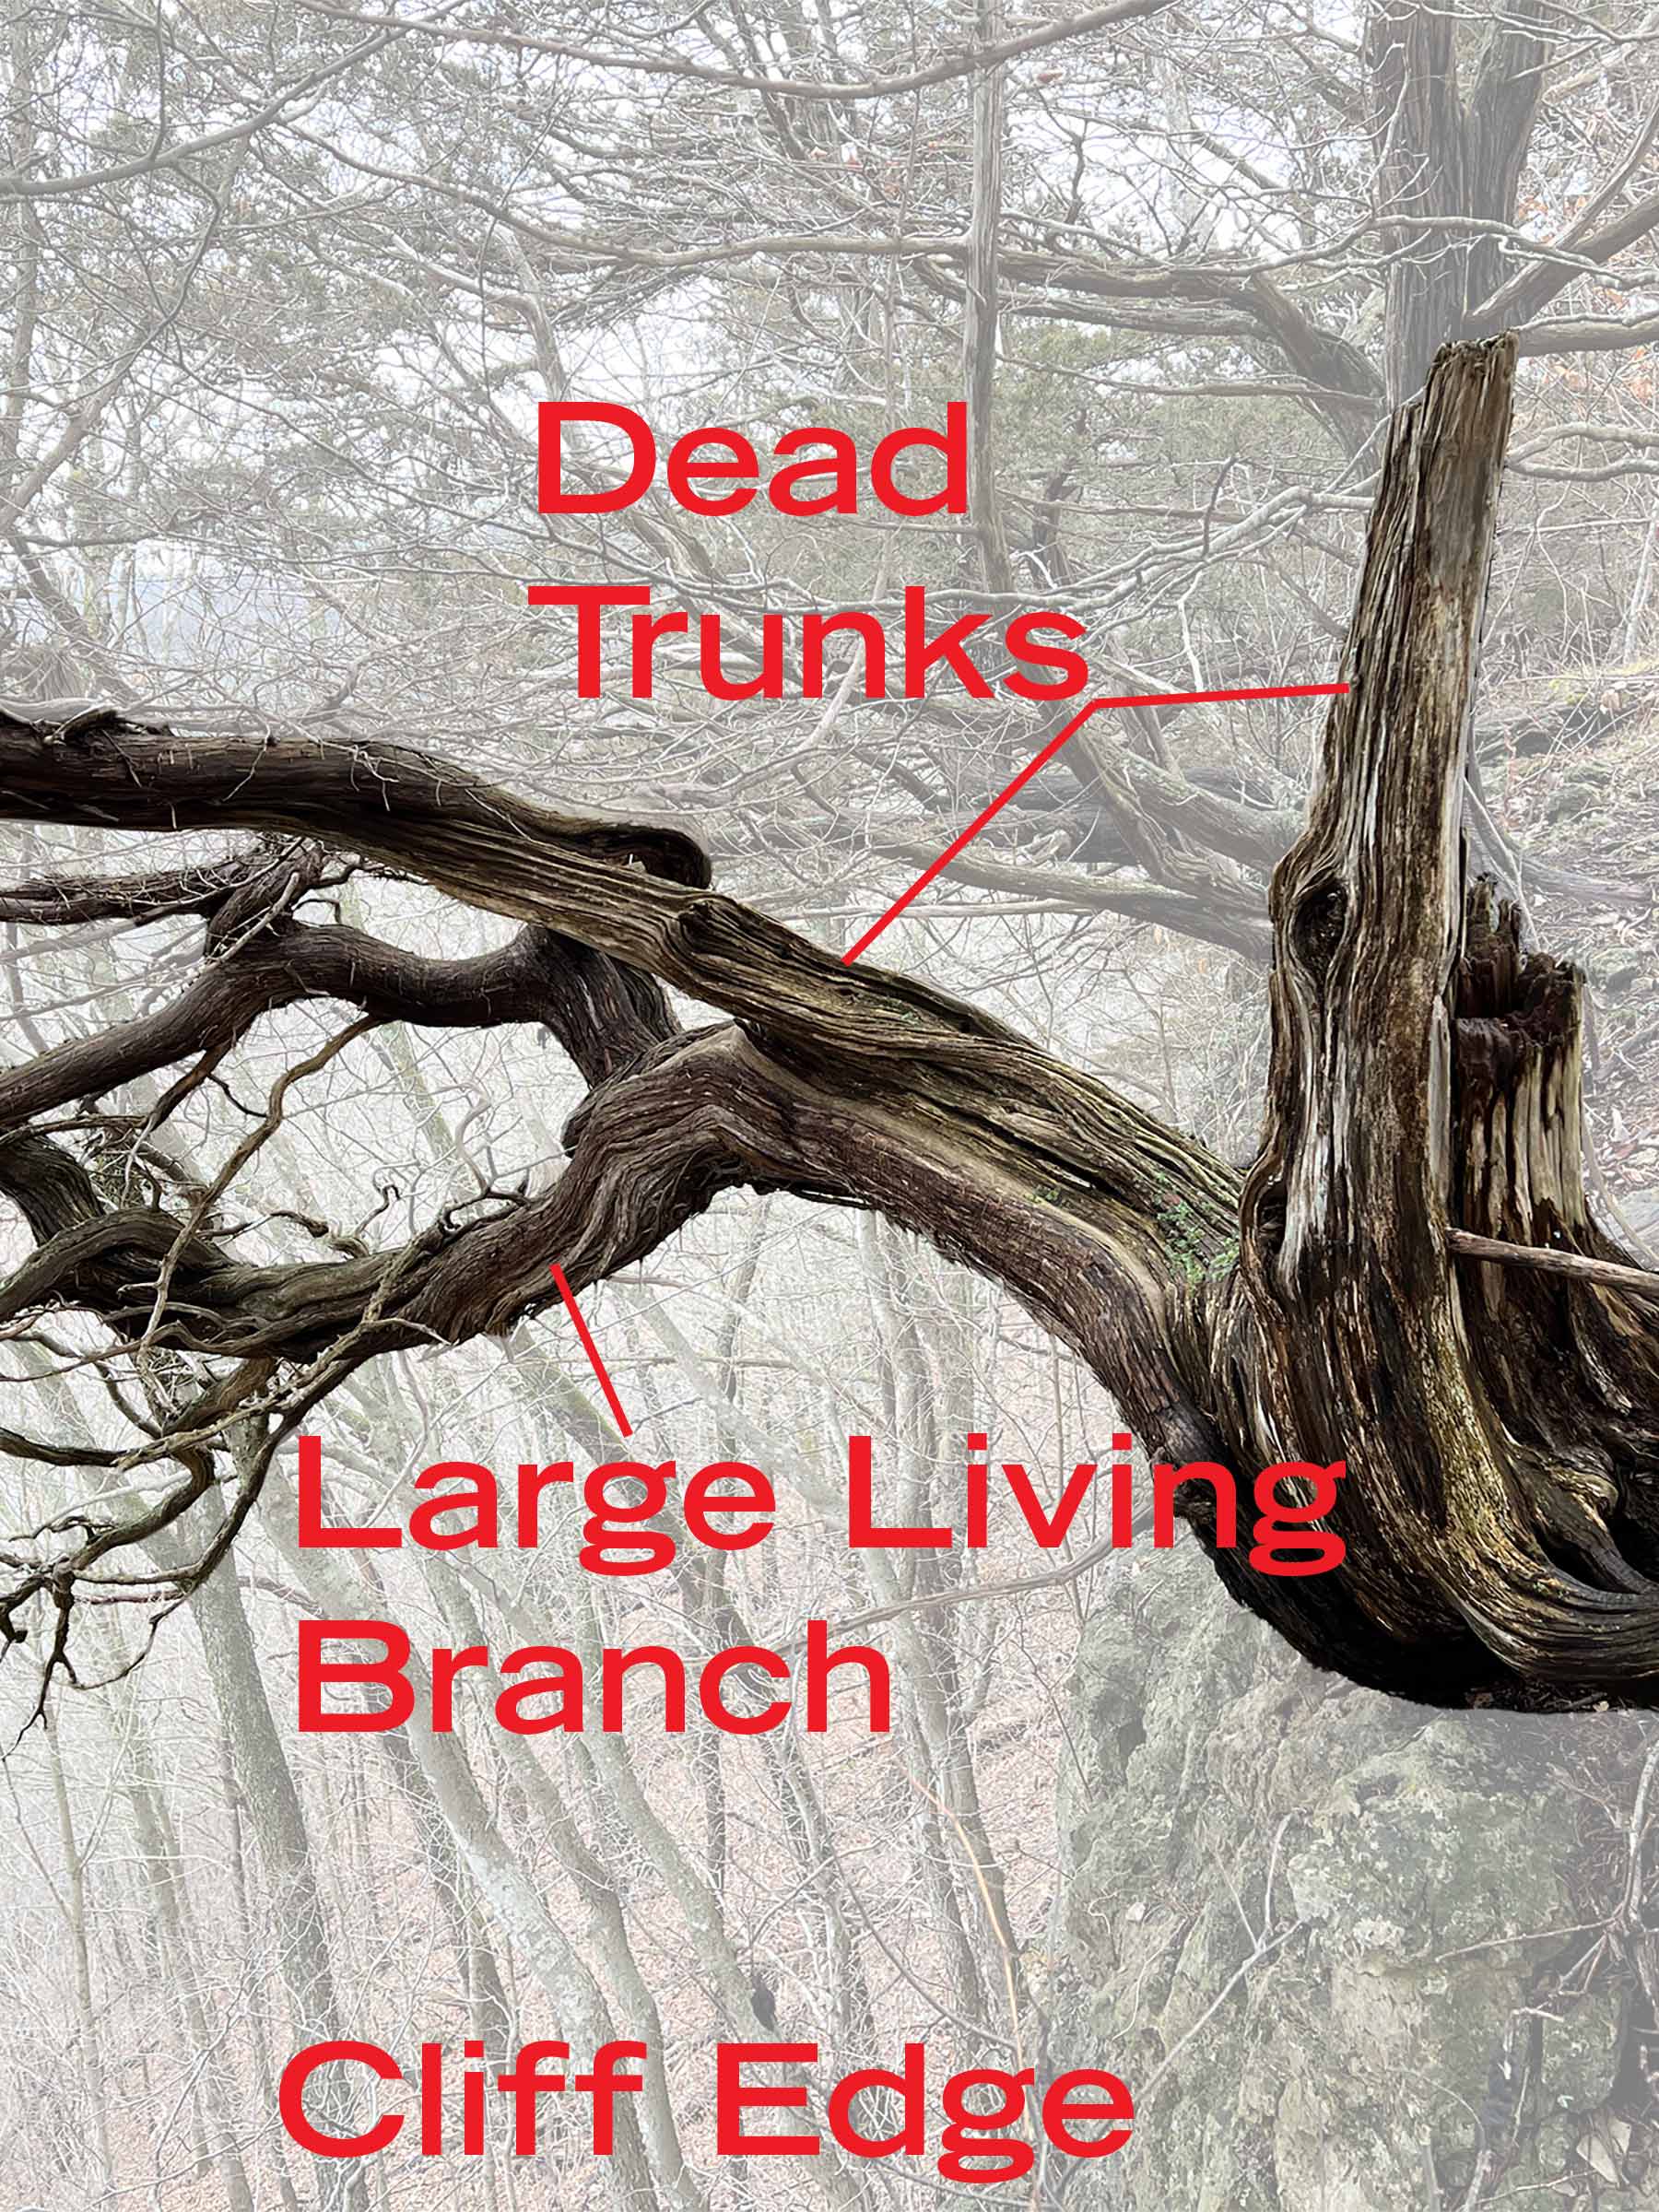 Large living branch and dead trunks of redcedar along cliff edge.